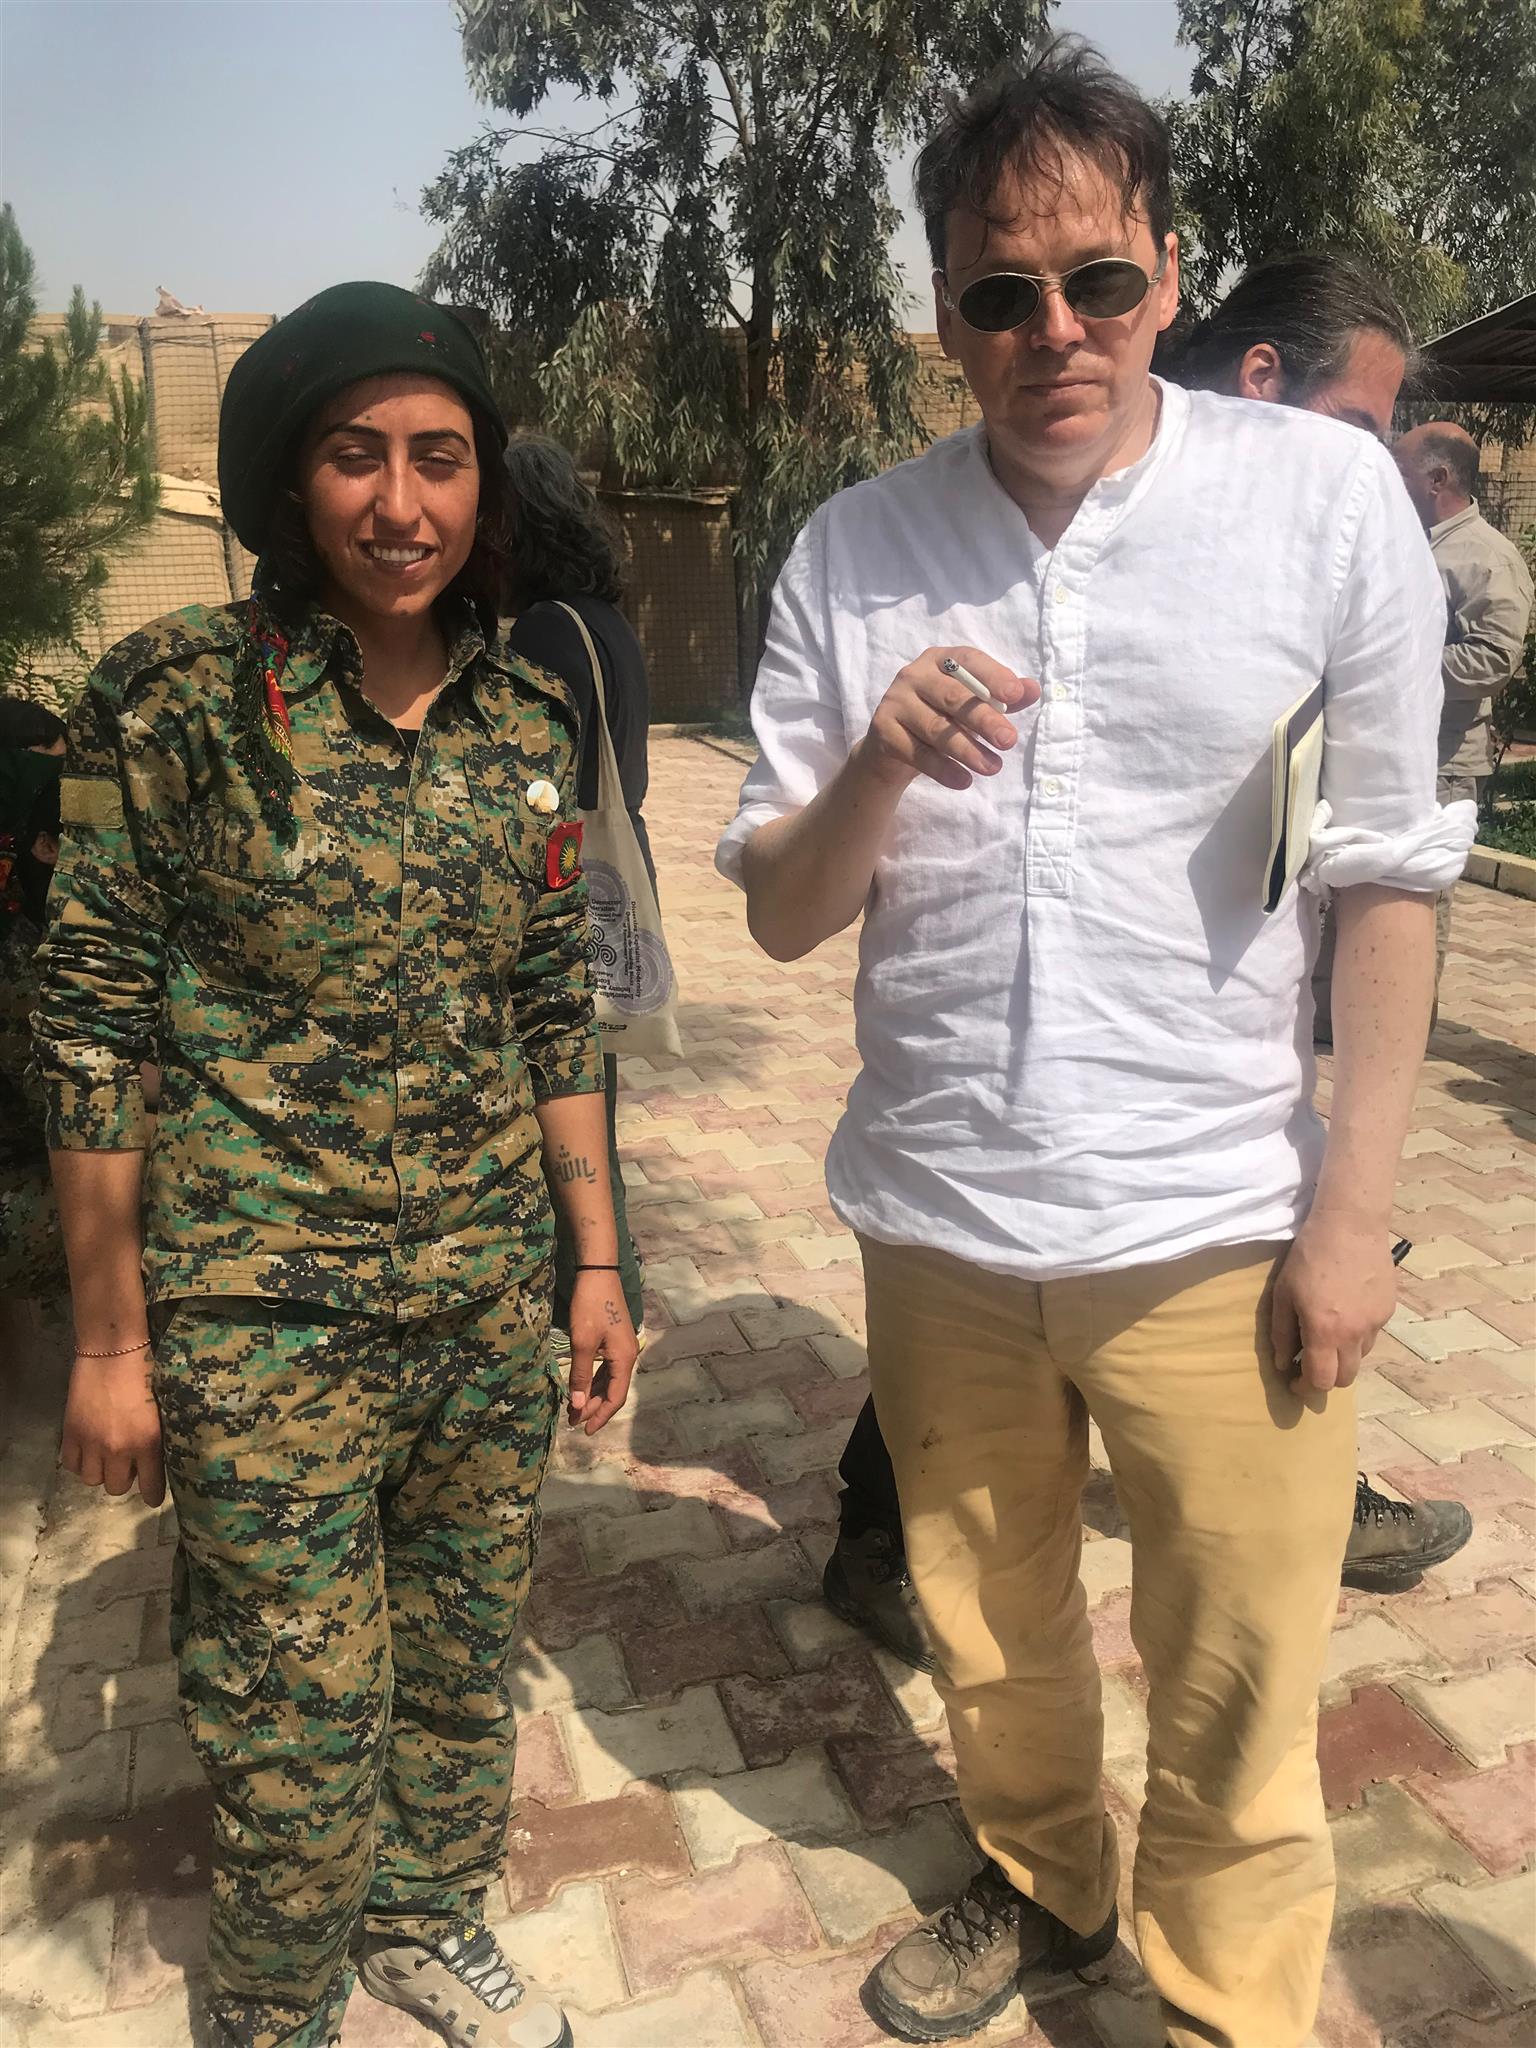 YBJ (Yezidi Women's Forces) fighter with David in Shengal